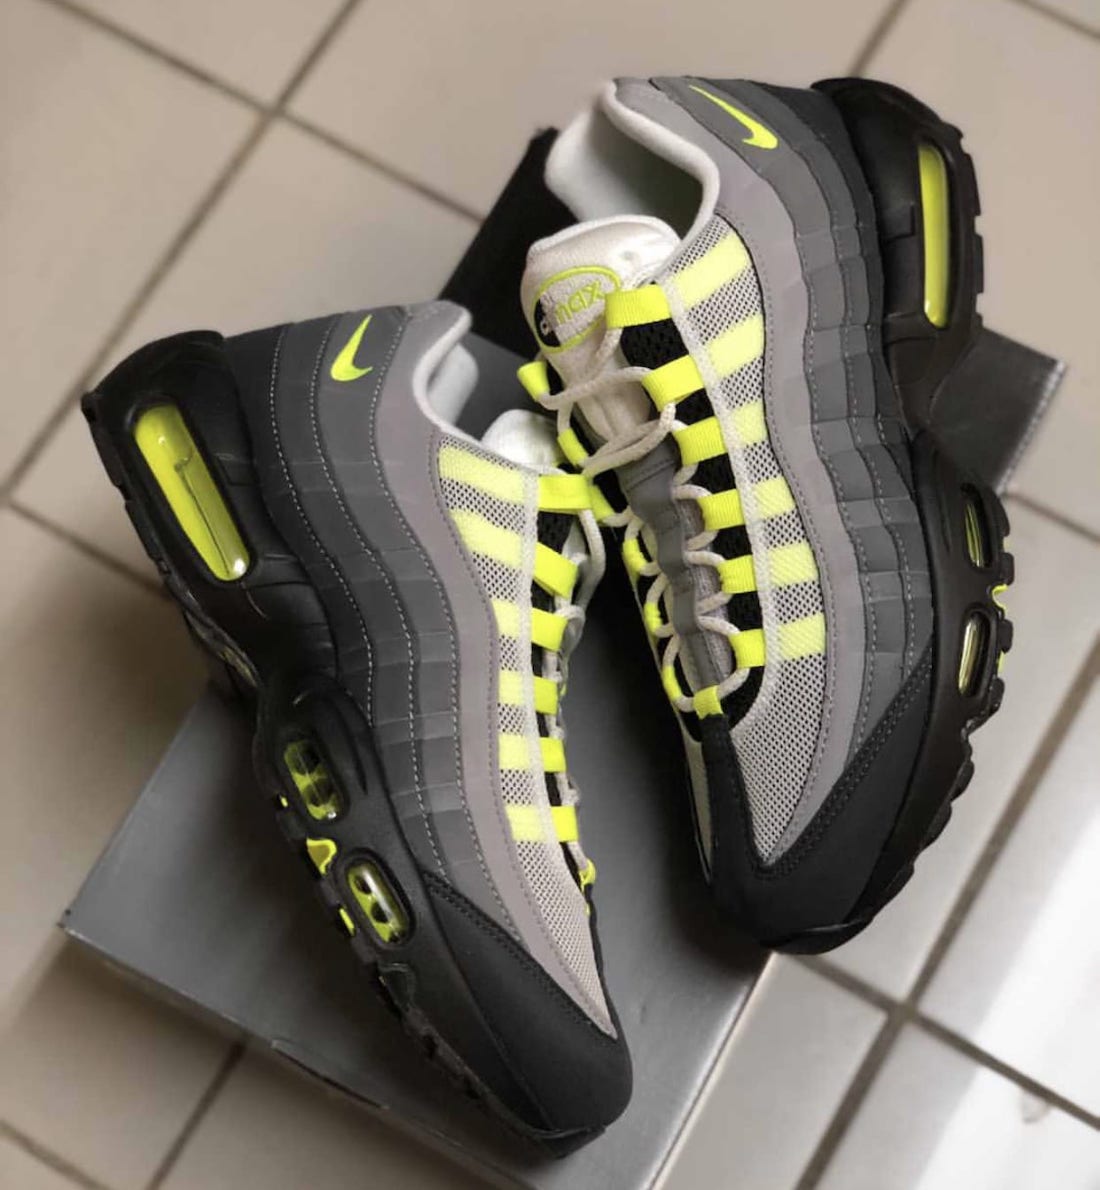 Nike Air Max 95 OG Neon Yellow 2020 Release Date CT1689-001